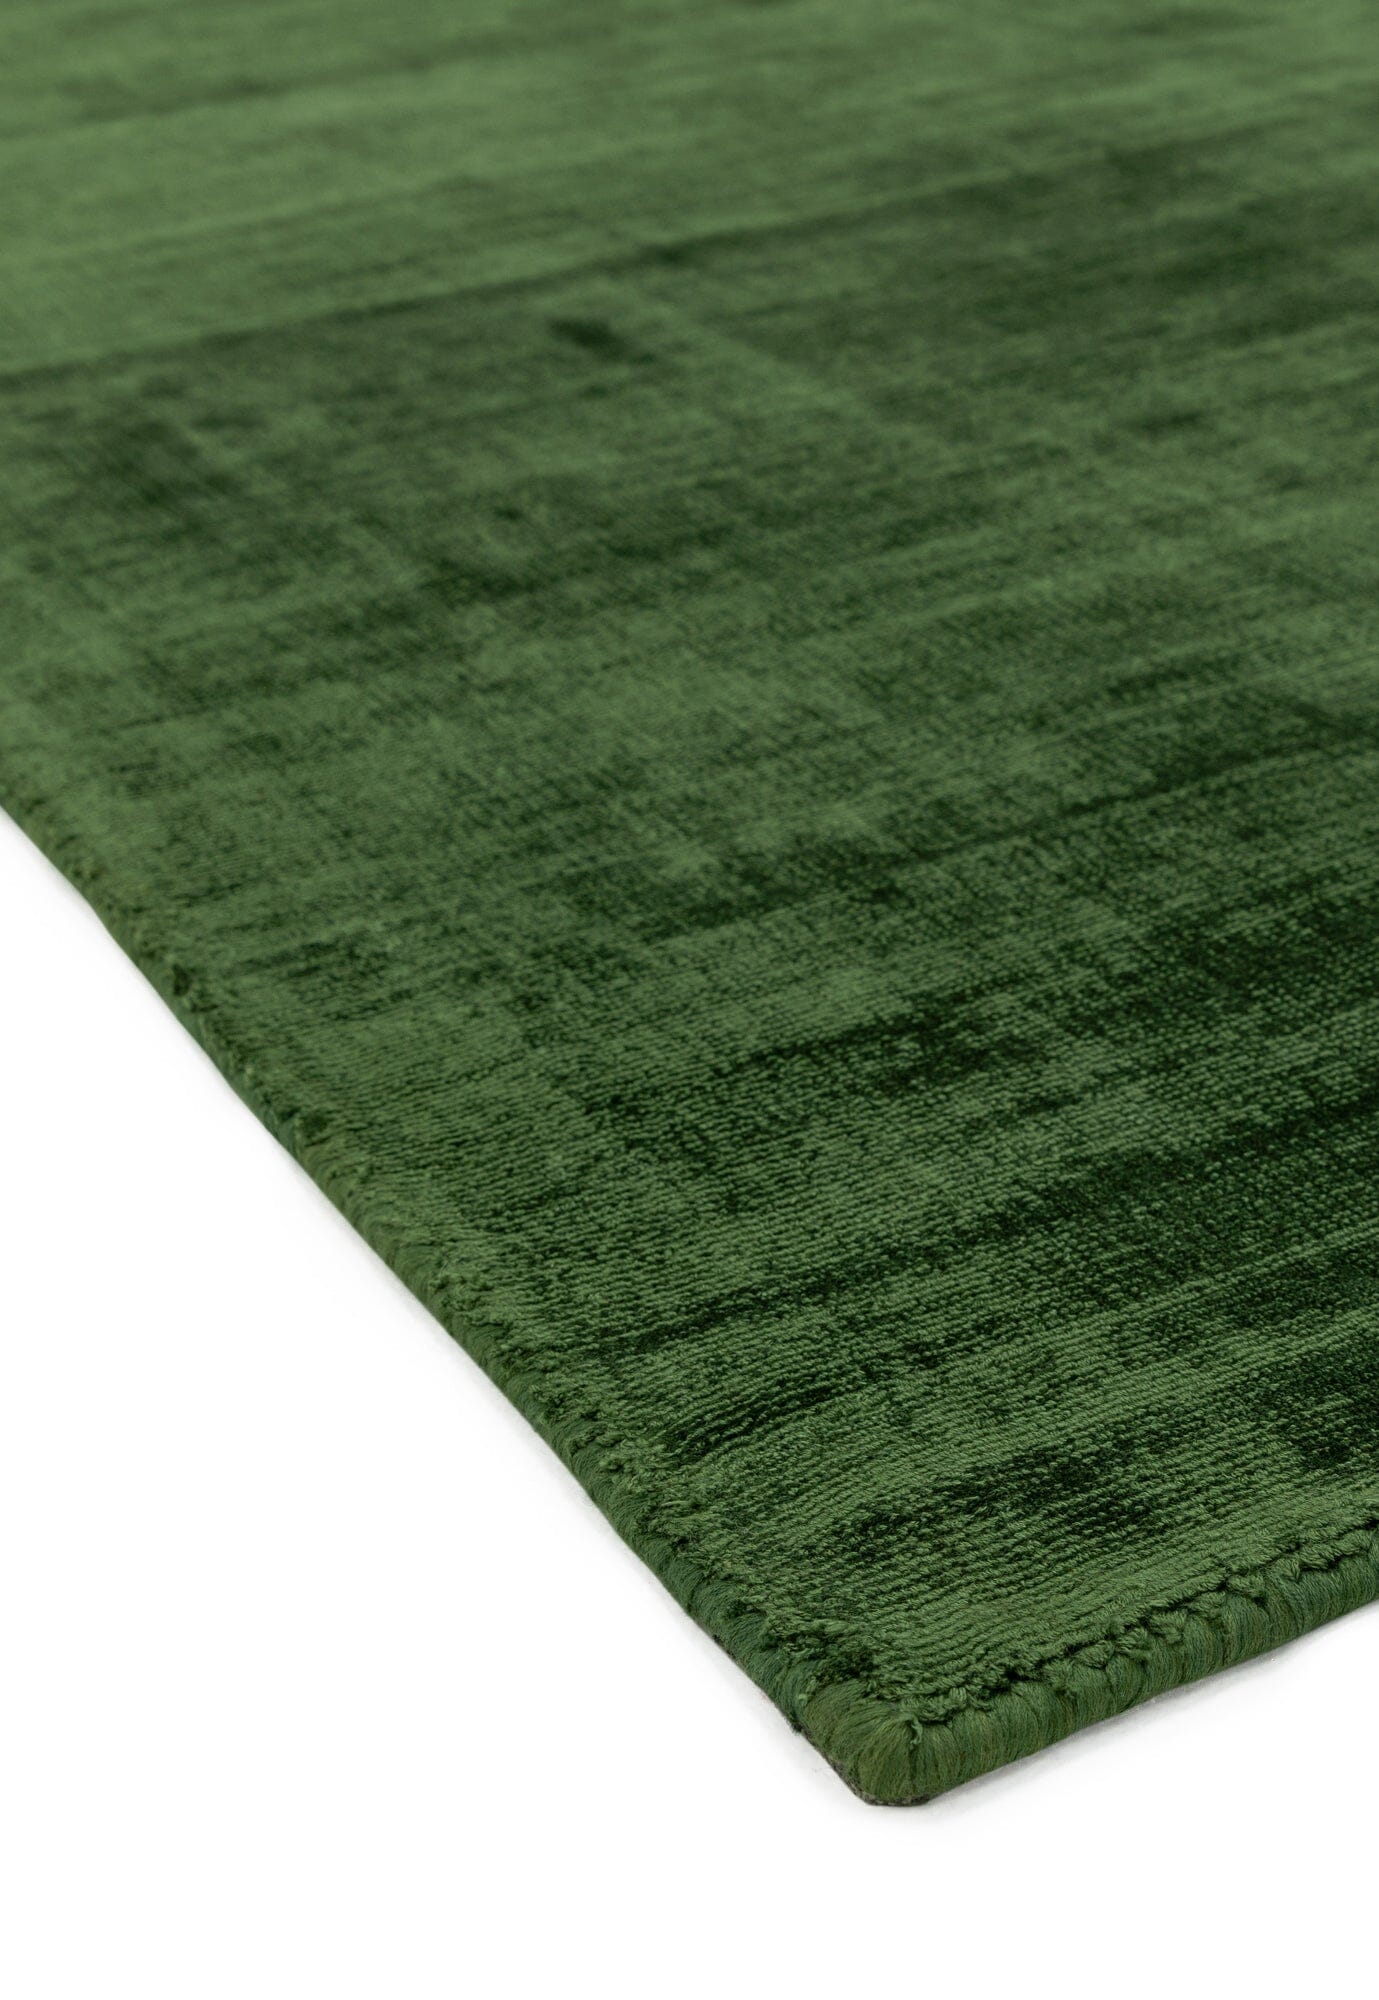 Asiatic Carpets Blade Hand Woven Rug Green - 240 x 340cm